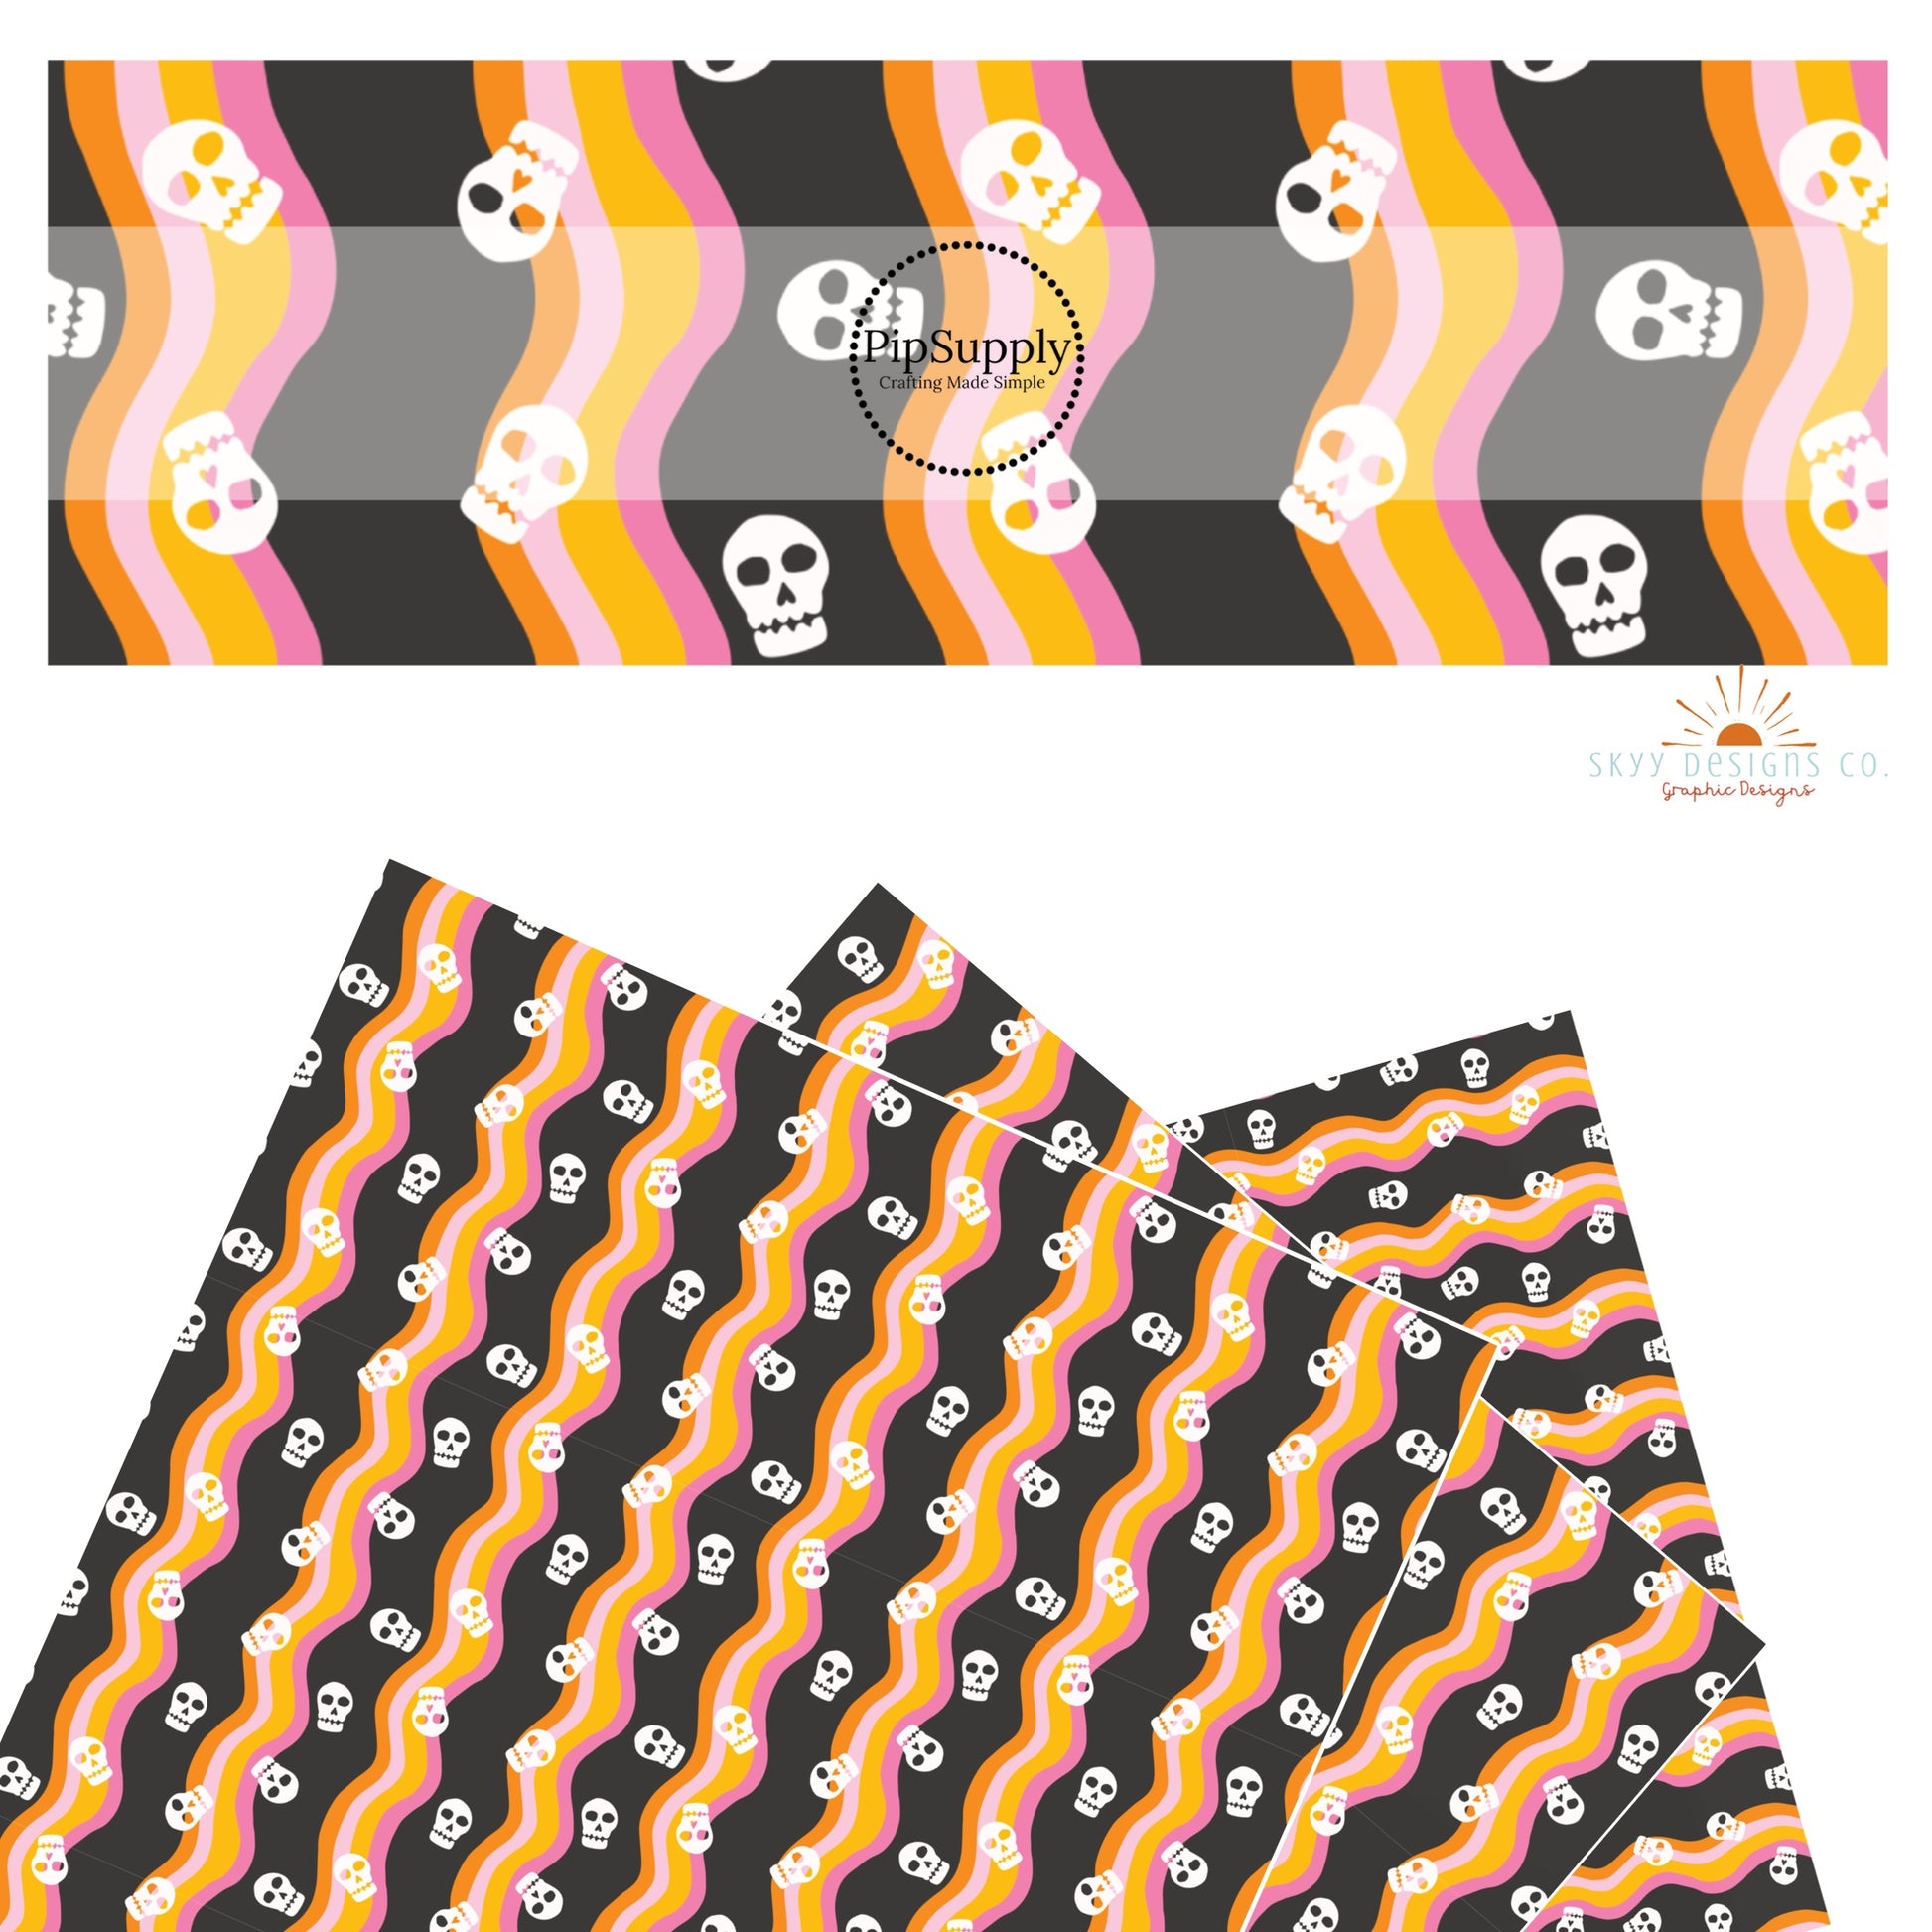 White skulls on pink and orange waves on black faux leather sheets